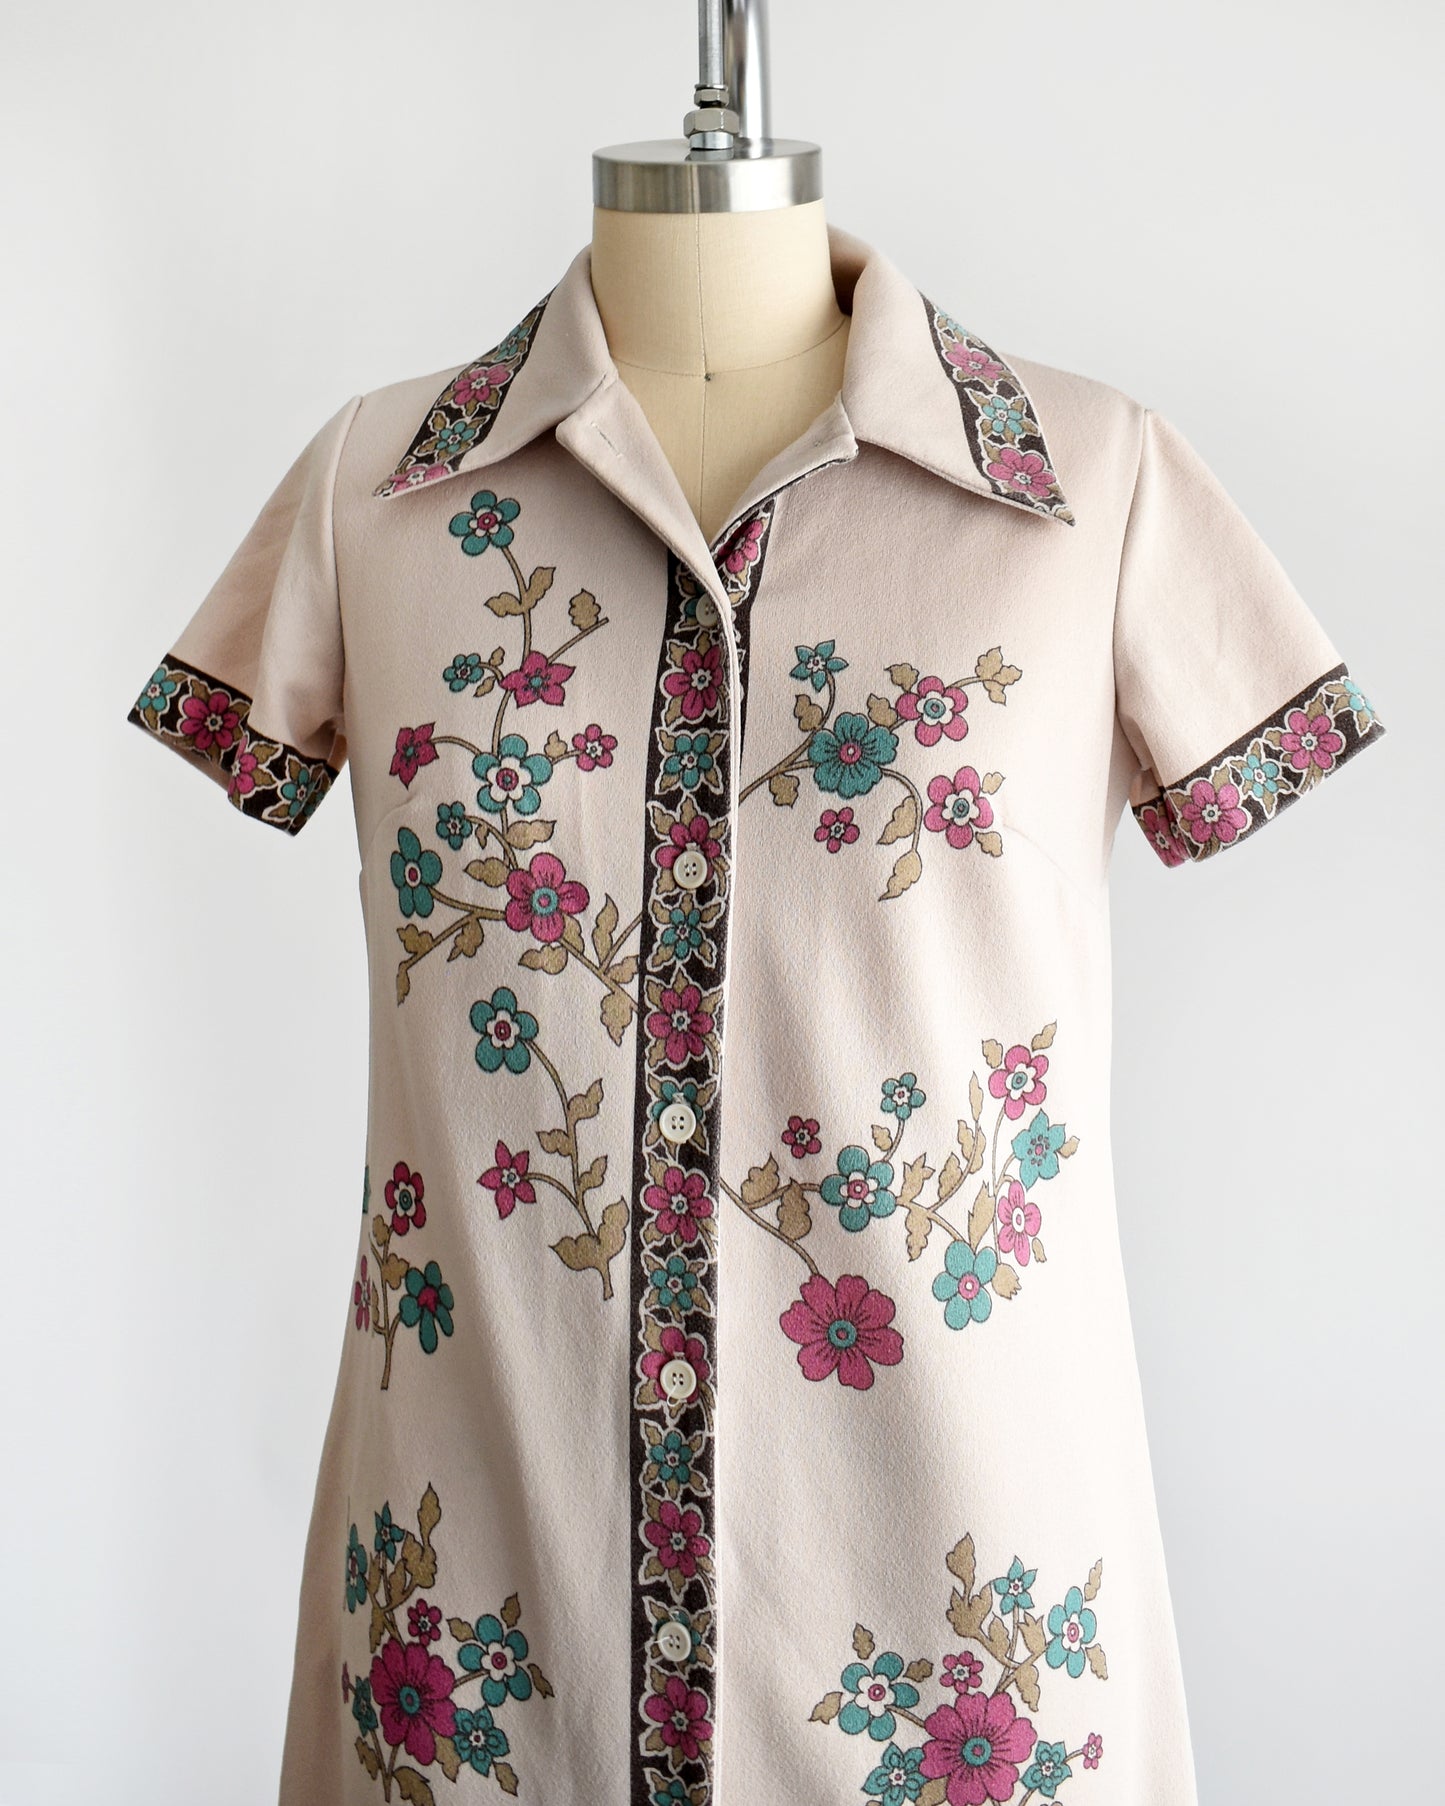 A vintage 1970s light brown mod dress with button front that features a blue and pink floral print. The top button is unbuttoned in this photo